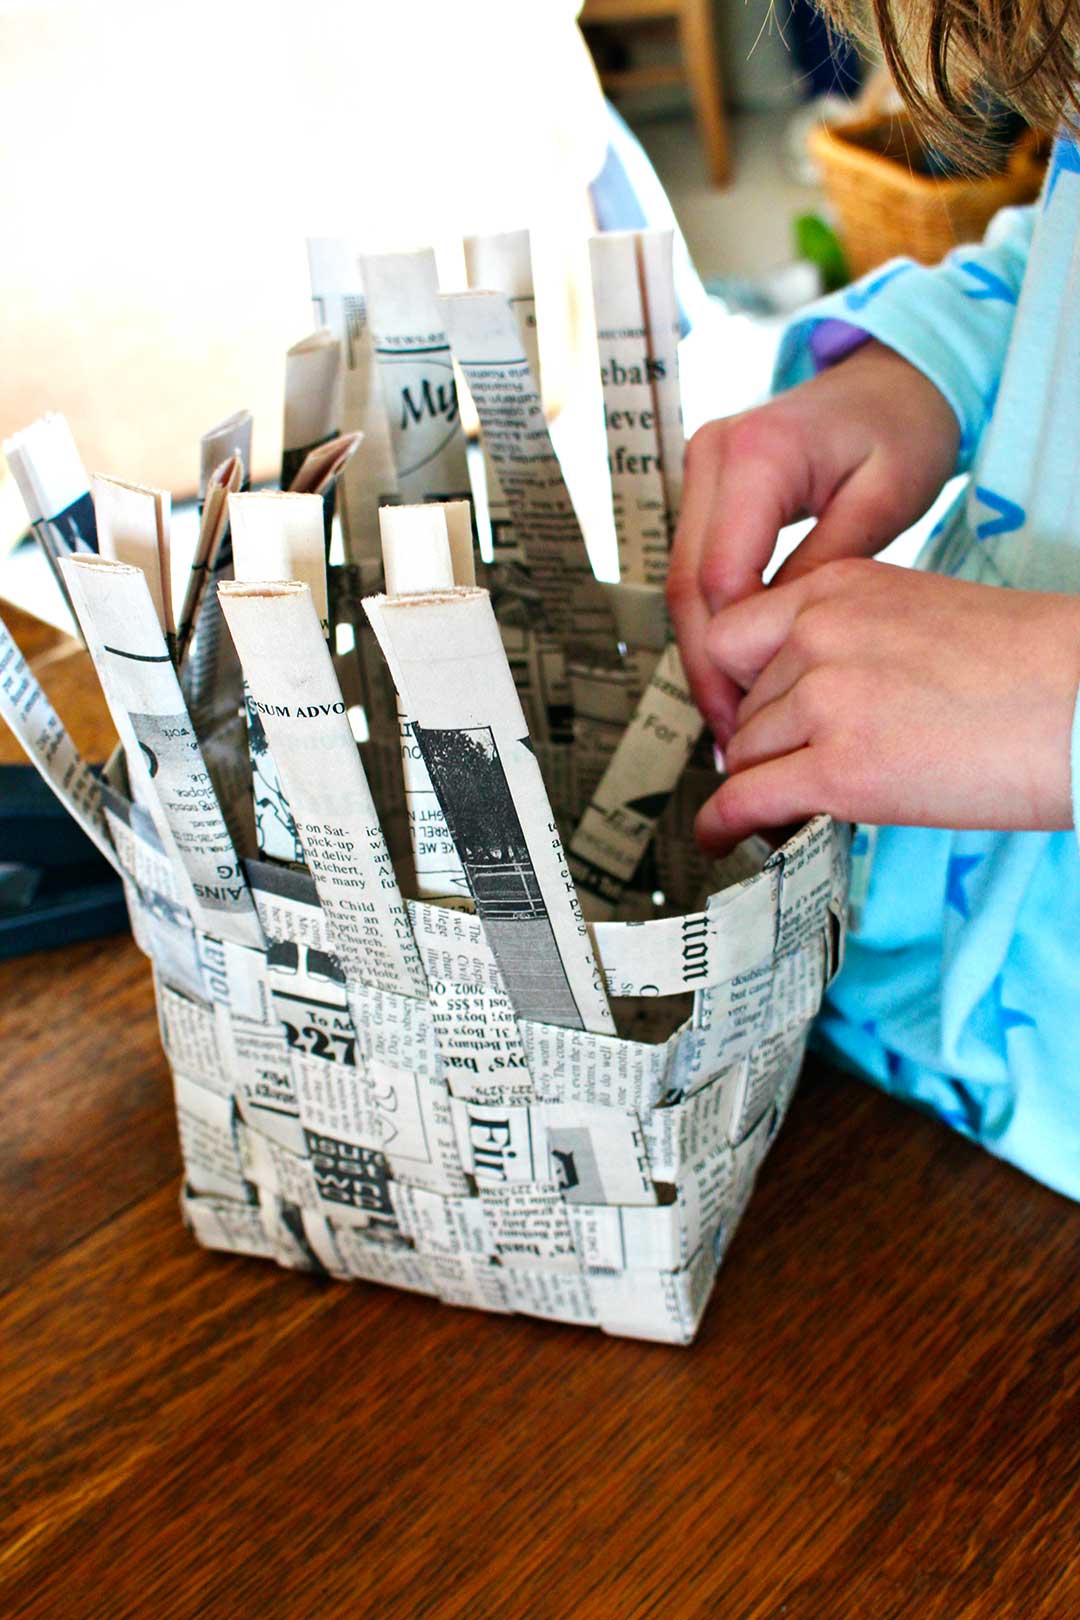 Child's hands folding down excess strips of newspaper to finish up woven newspaper basket.